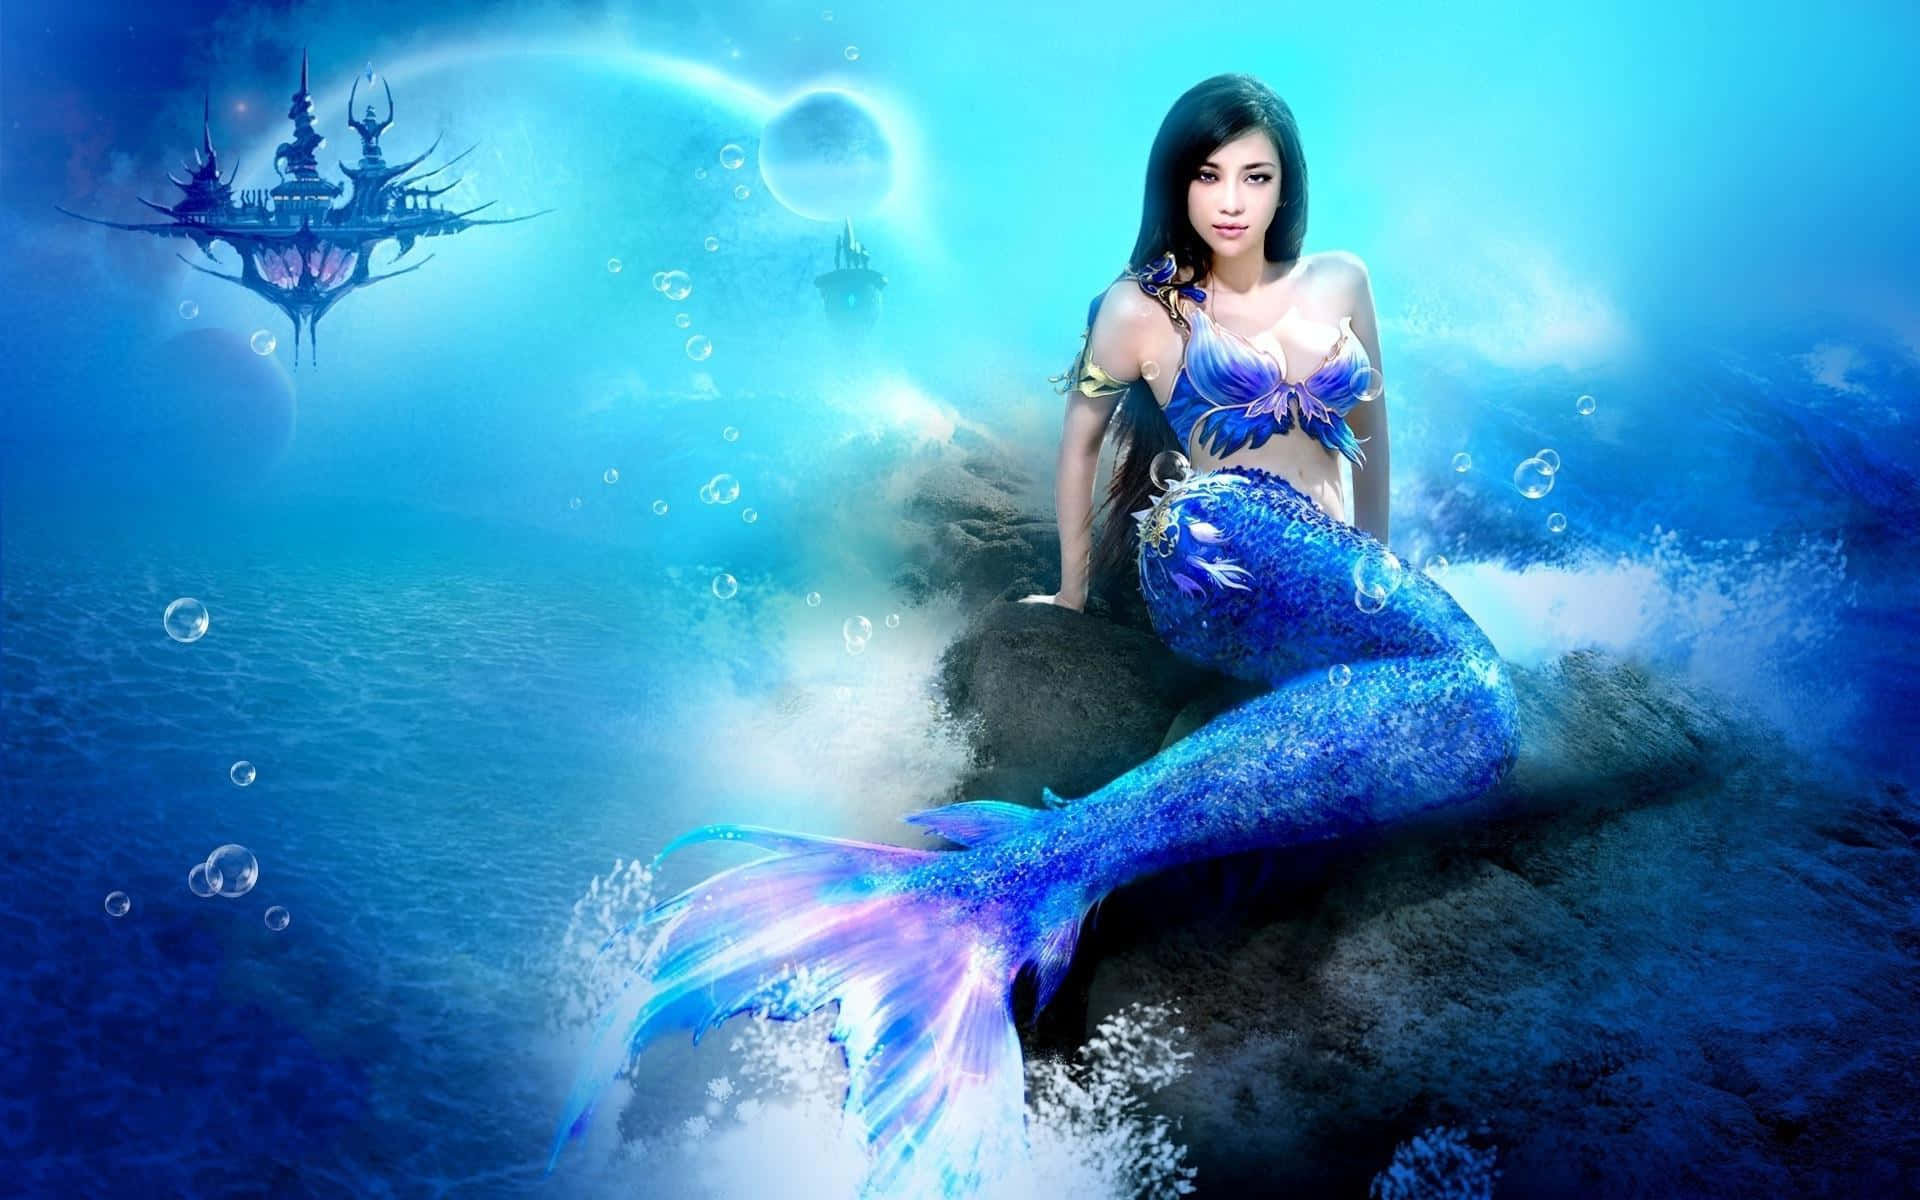 A real-life mermaid inspires with her beauty.